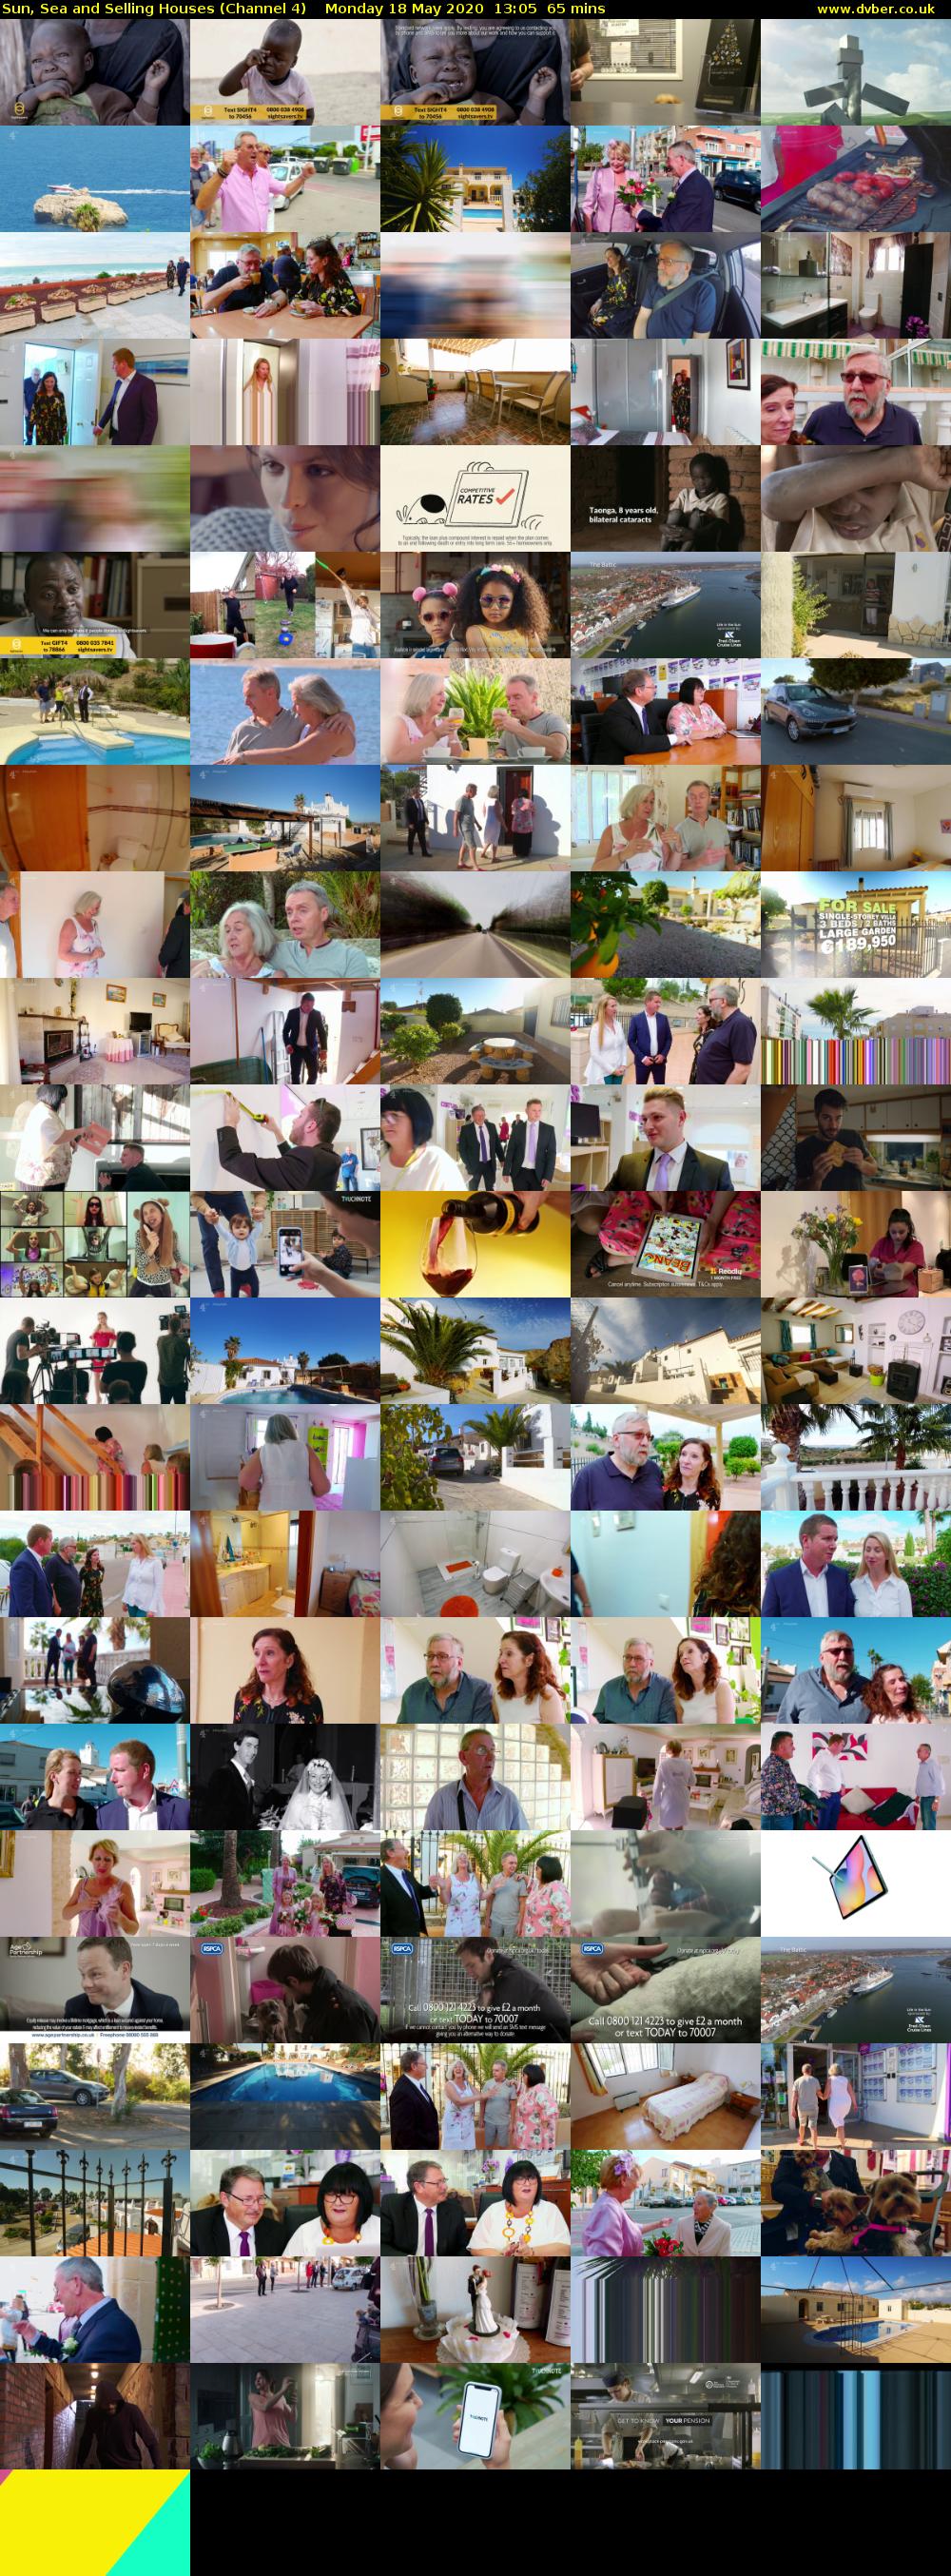 Sun, Sea and Selling Houses (Channel 4) Monday 18 May 2020 13:05 - 14:10